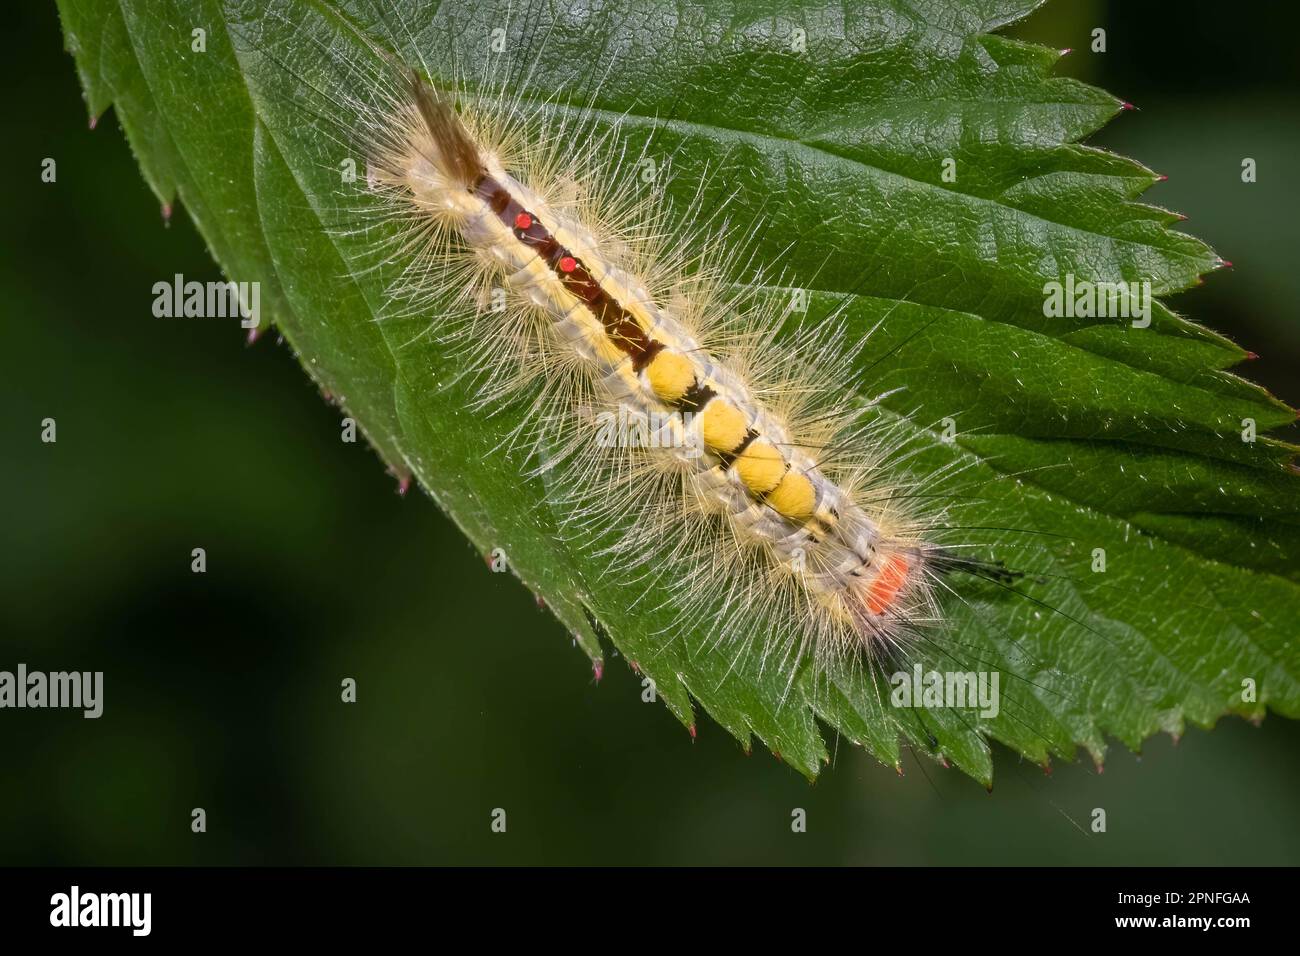 Top view of a White-marked Tussock Moth on a leaf. Raleigh, North Carolina. Stock Photo